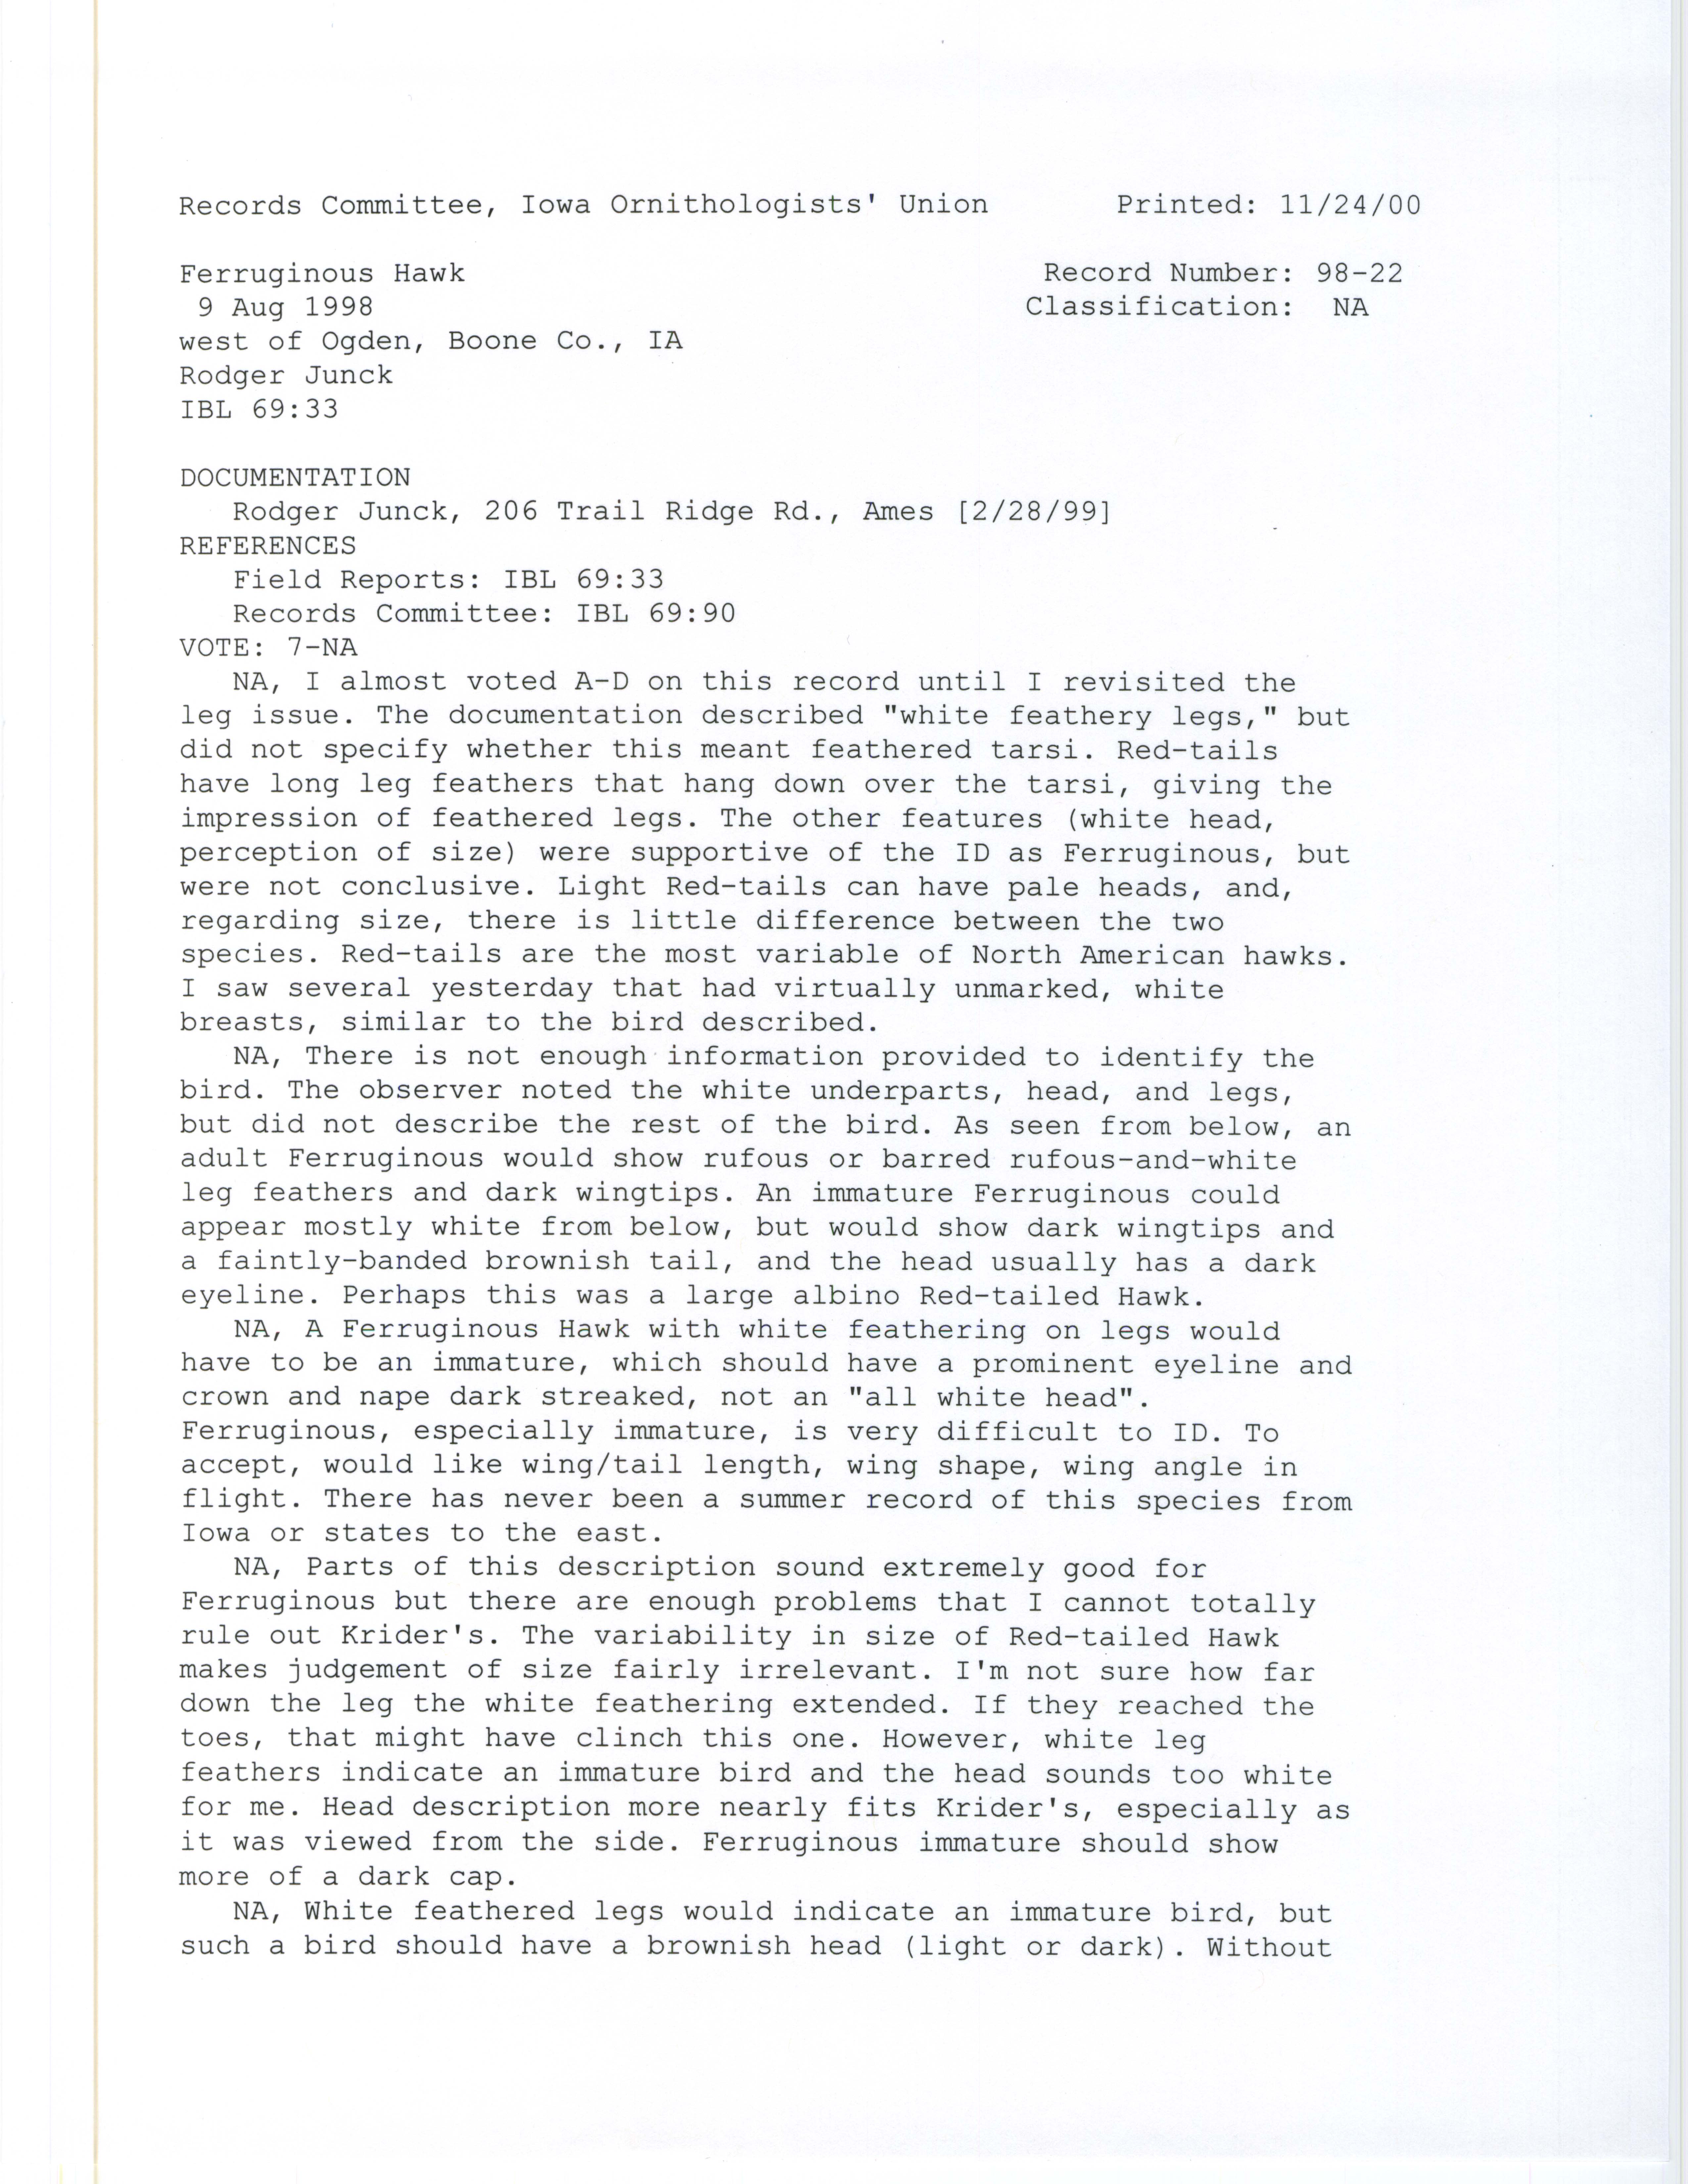 Records Committee review for rare bird sighting of Ferruginous Hawk west of Ogden, 1998